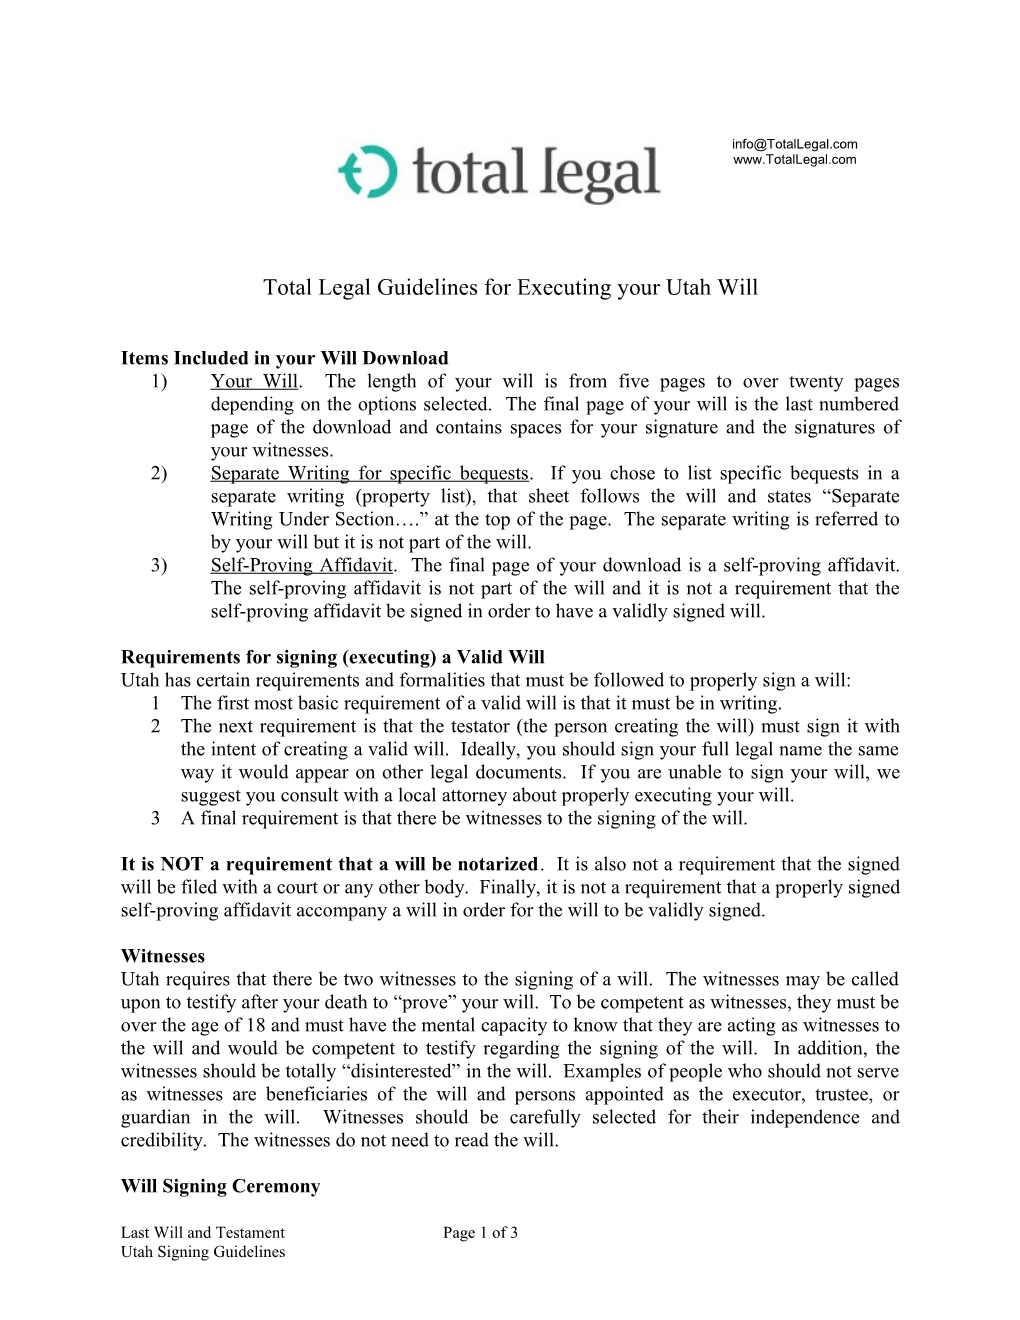 Total Legal Guidelines for Executing Your Utah Will